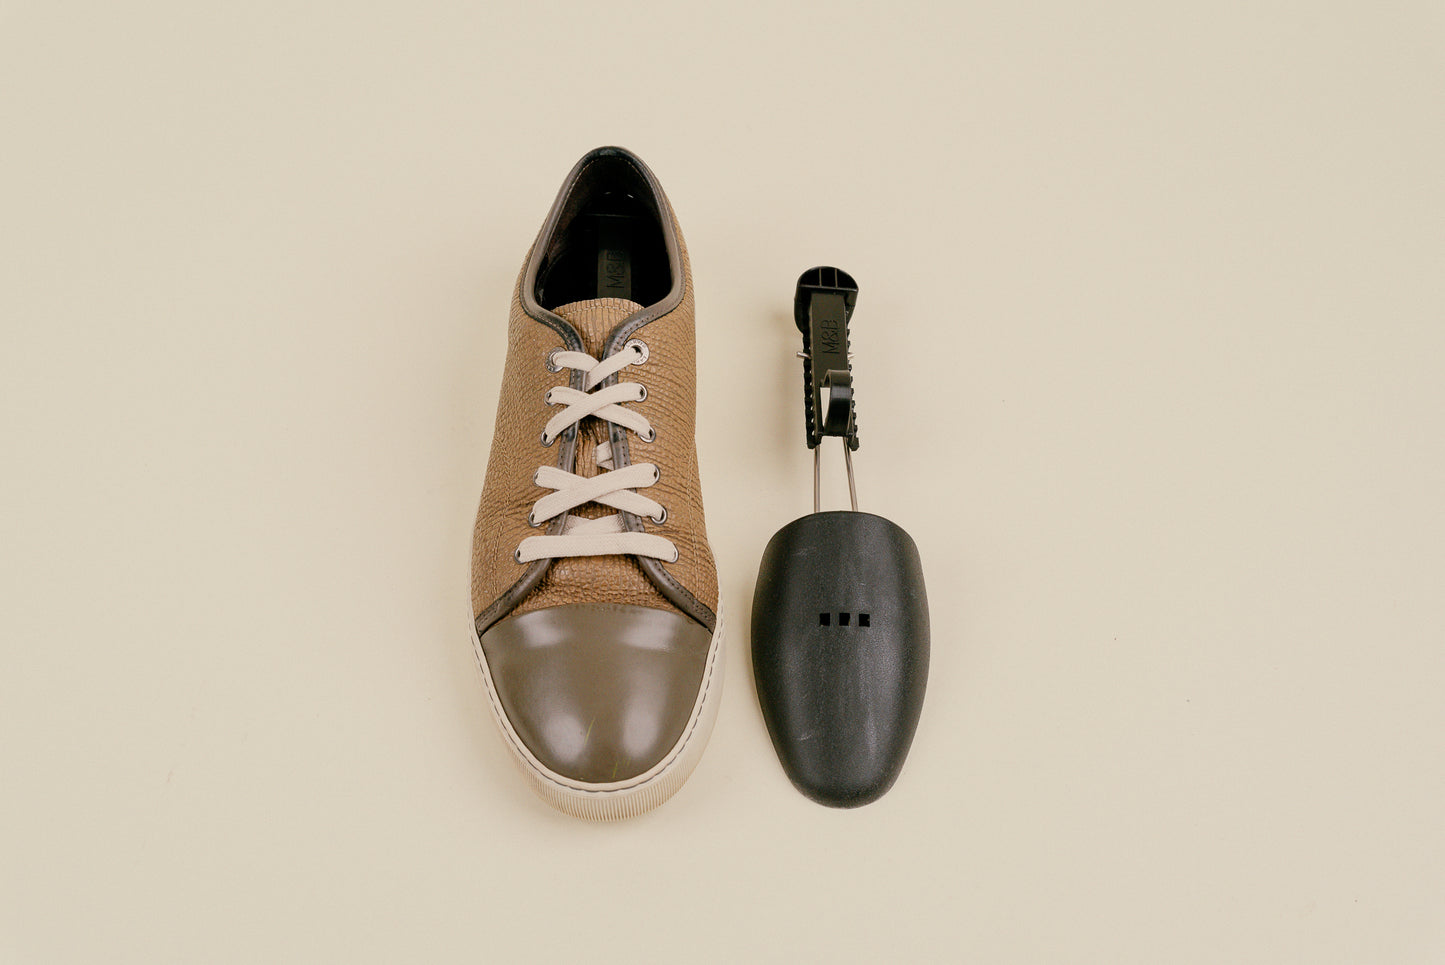 Brillaré black lightweight adjustable shoe trees for sneakers or dress shoes shown in Lanvin sneakers